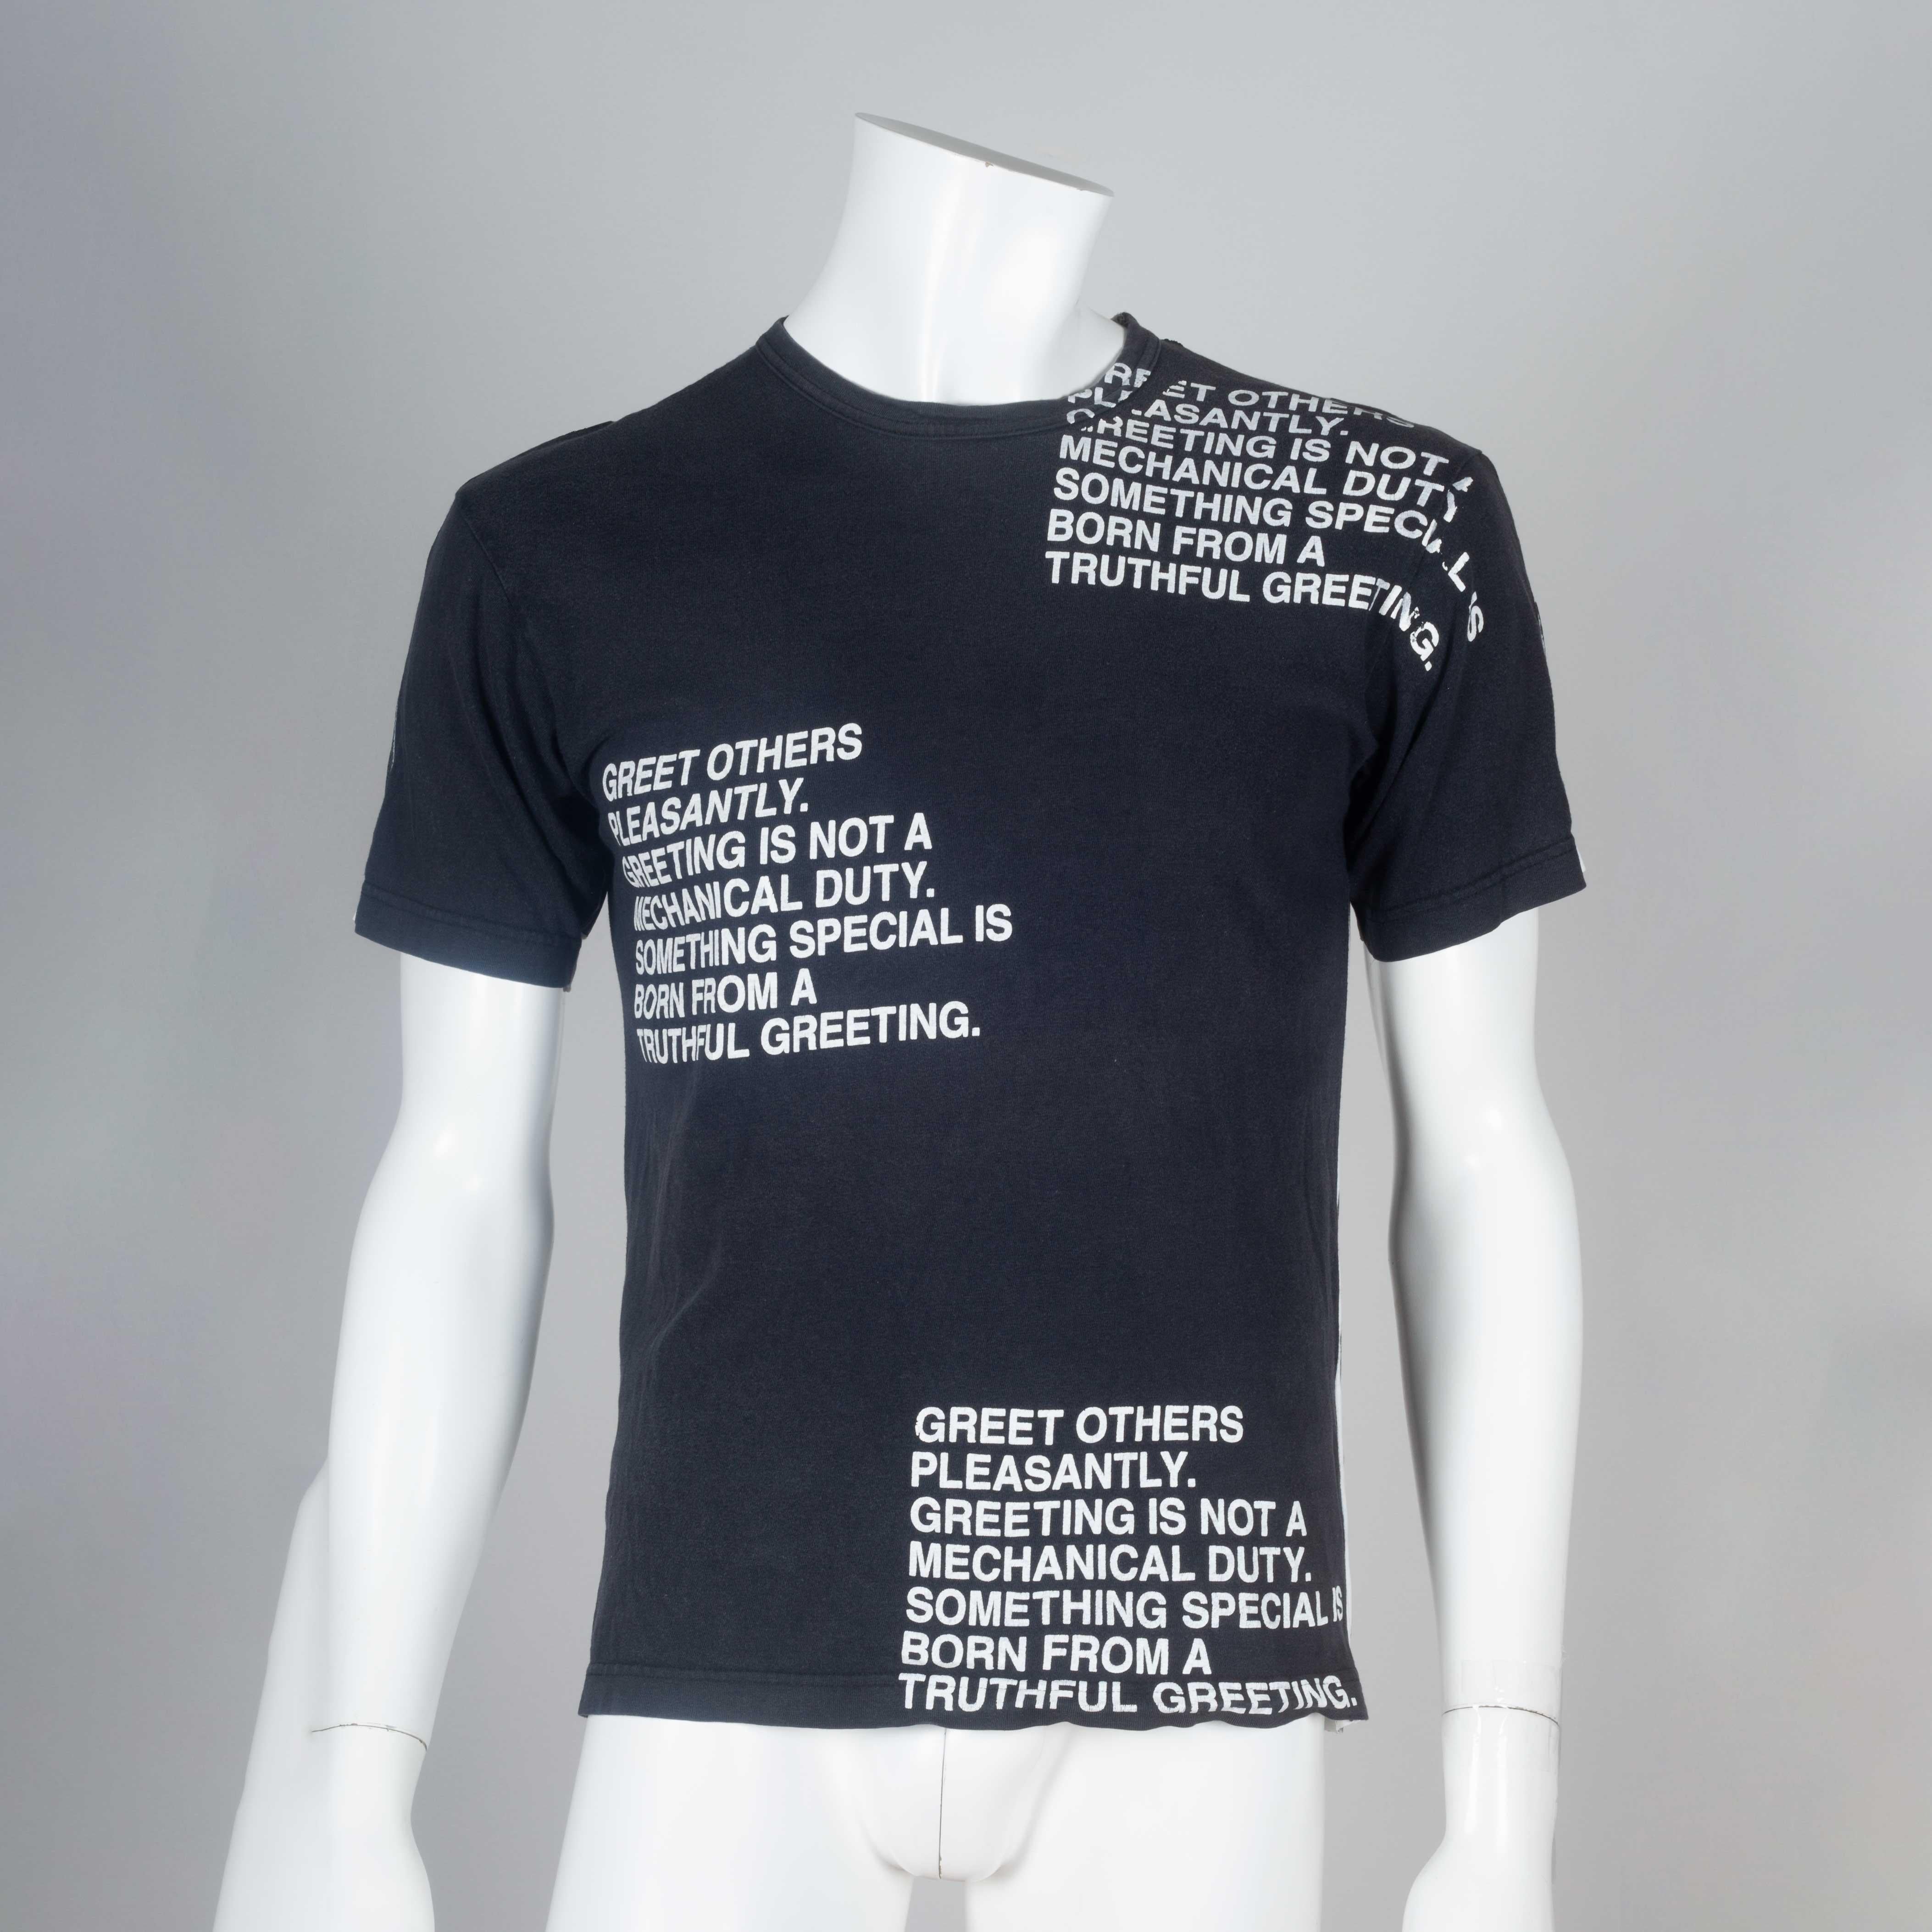 Junya Watanabe Comme des Garçons 2001 black and white distressed poem tee shirt from Japan. Poem reads:

Greet others pleasantly. Greeting is not a mechanical duty. Something special is born from a truthful greeting.

Black and white thick vertical